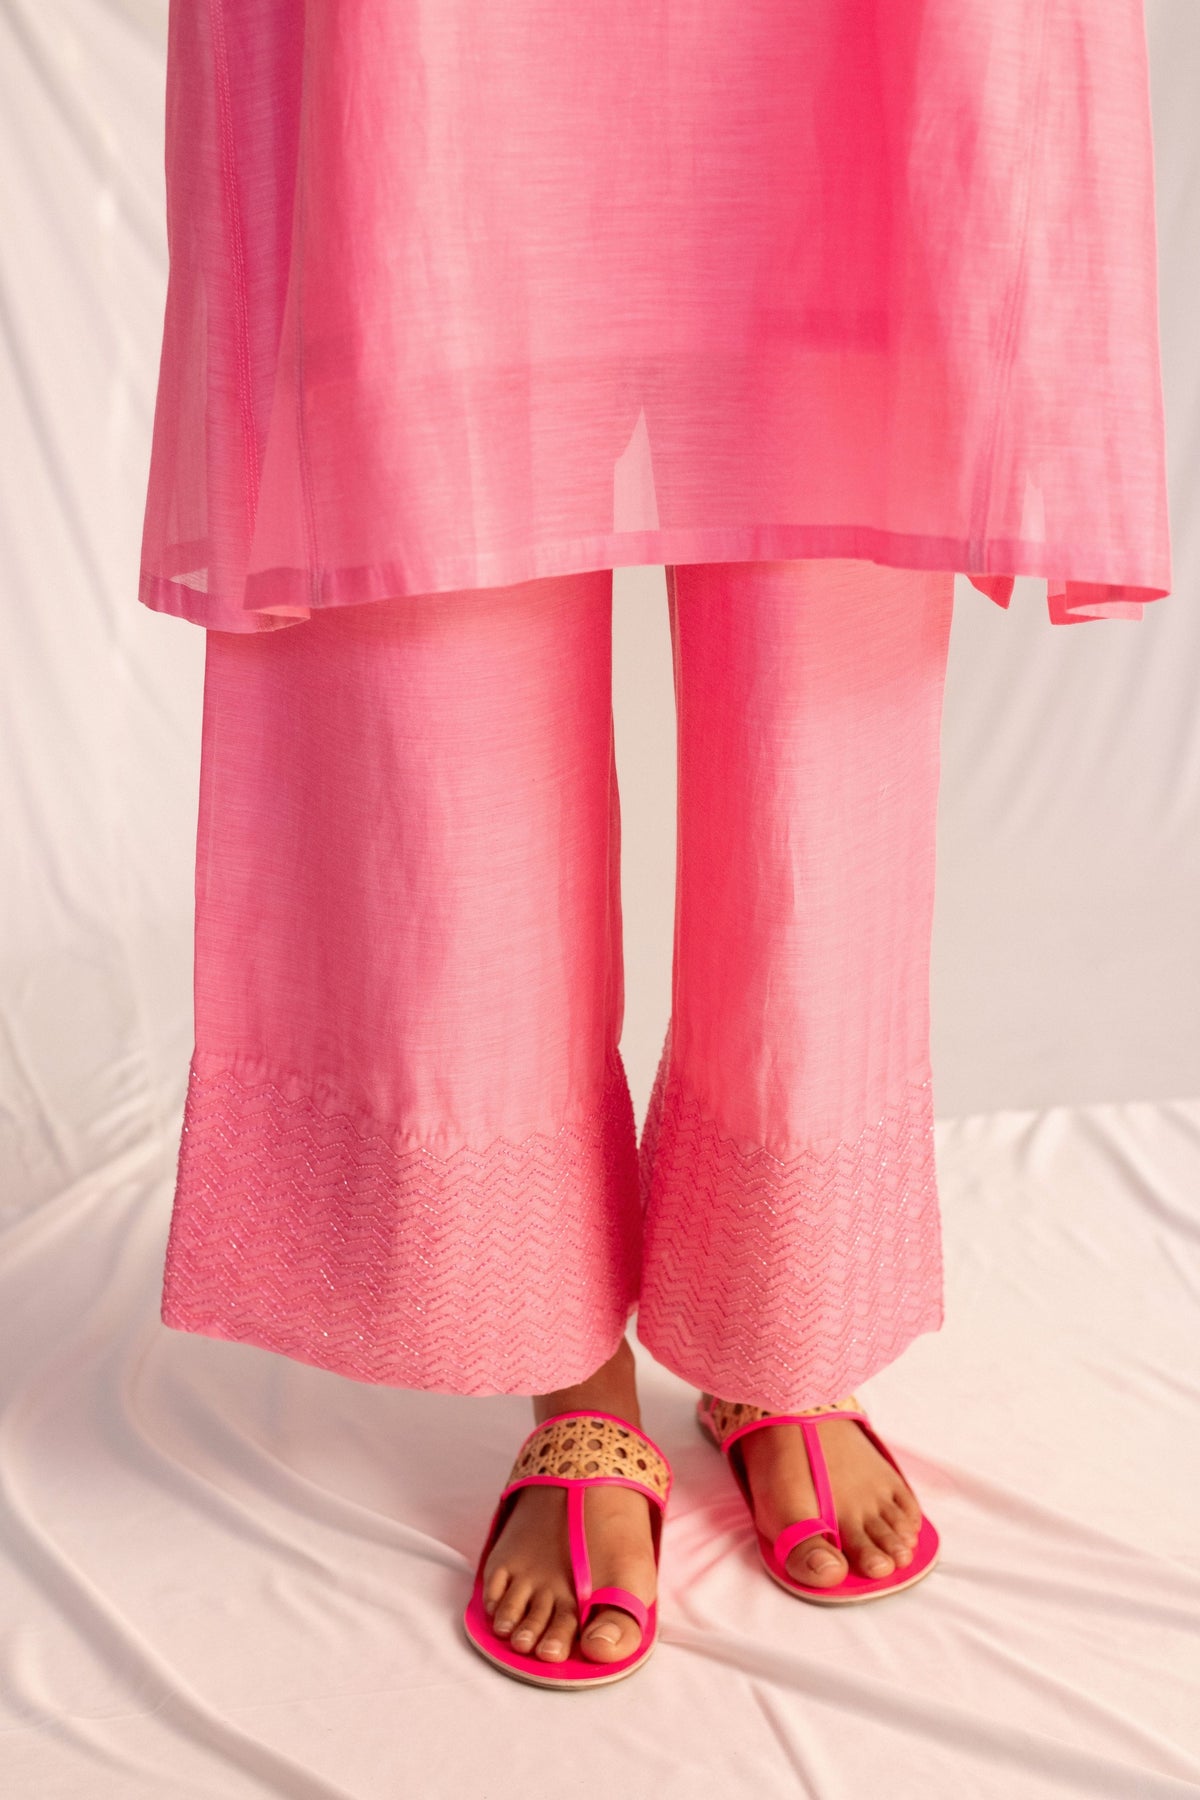 Pink Embroidered Tunic Set